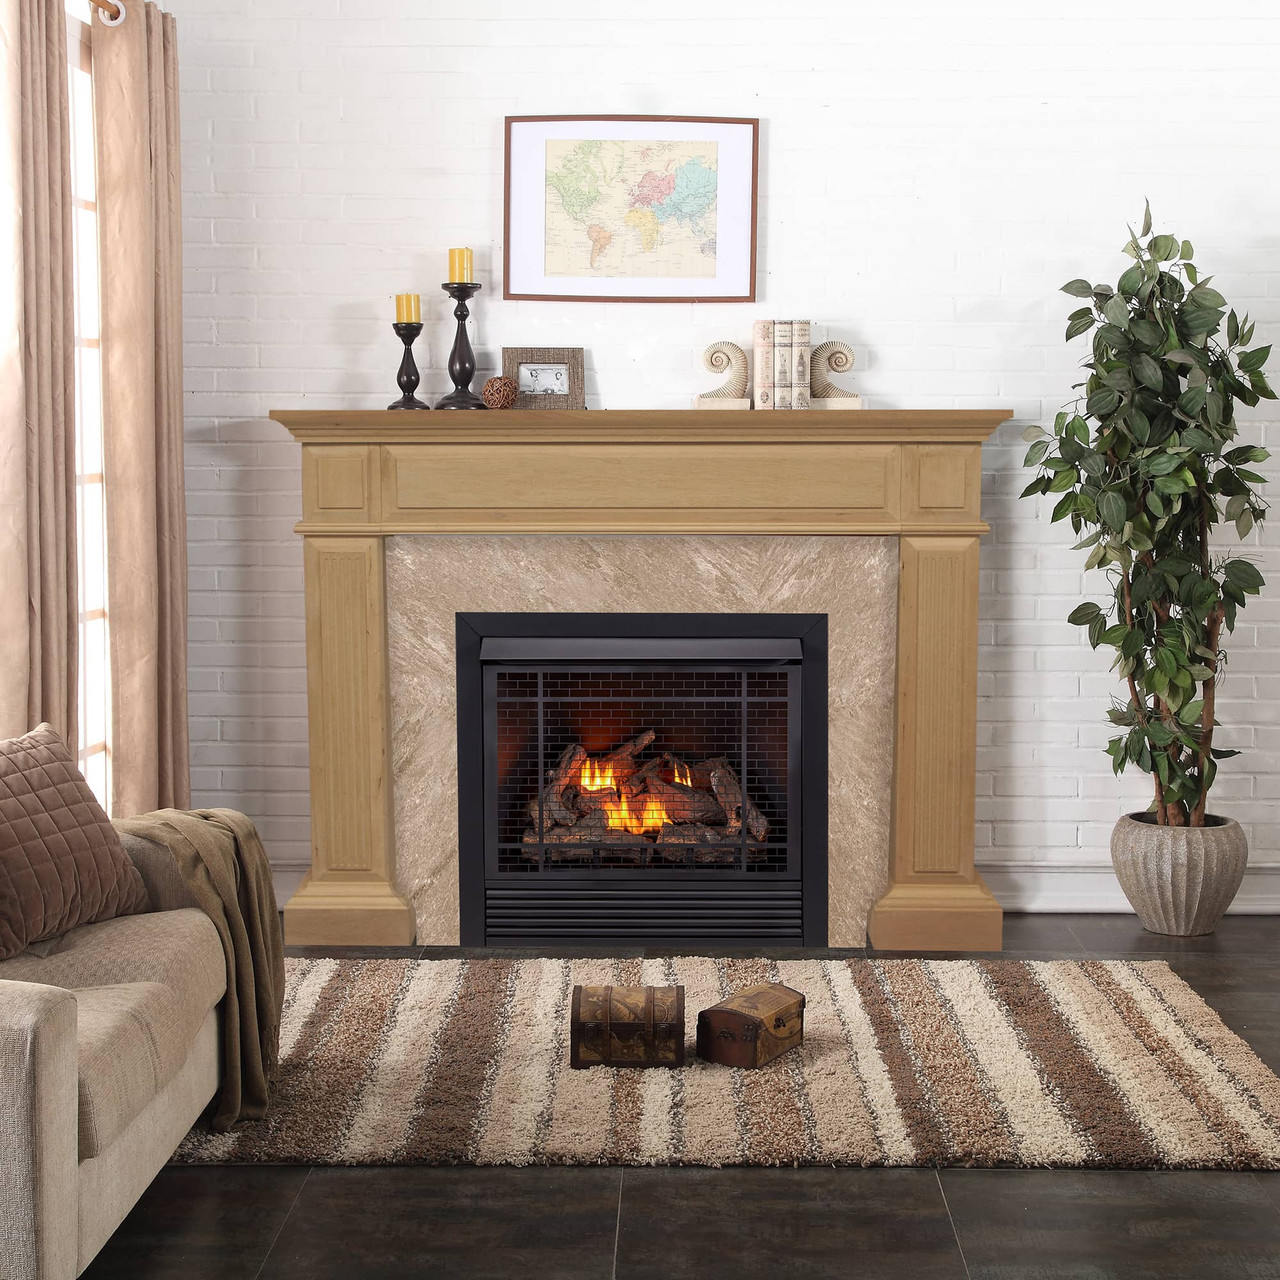 Hottest Photo Fireplace Hearth materials Suggestions A fireplace hearth is  the functional …